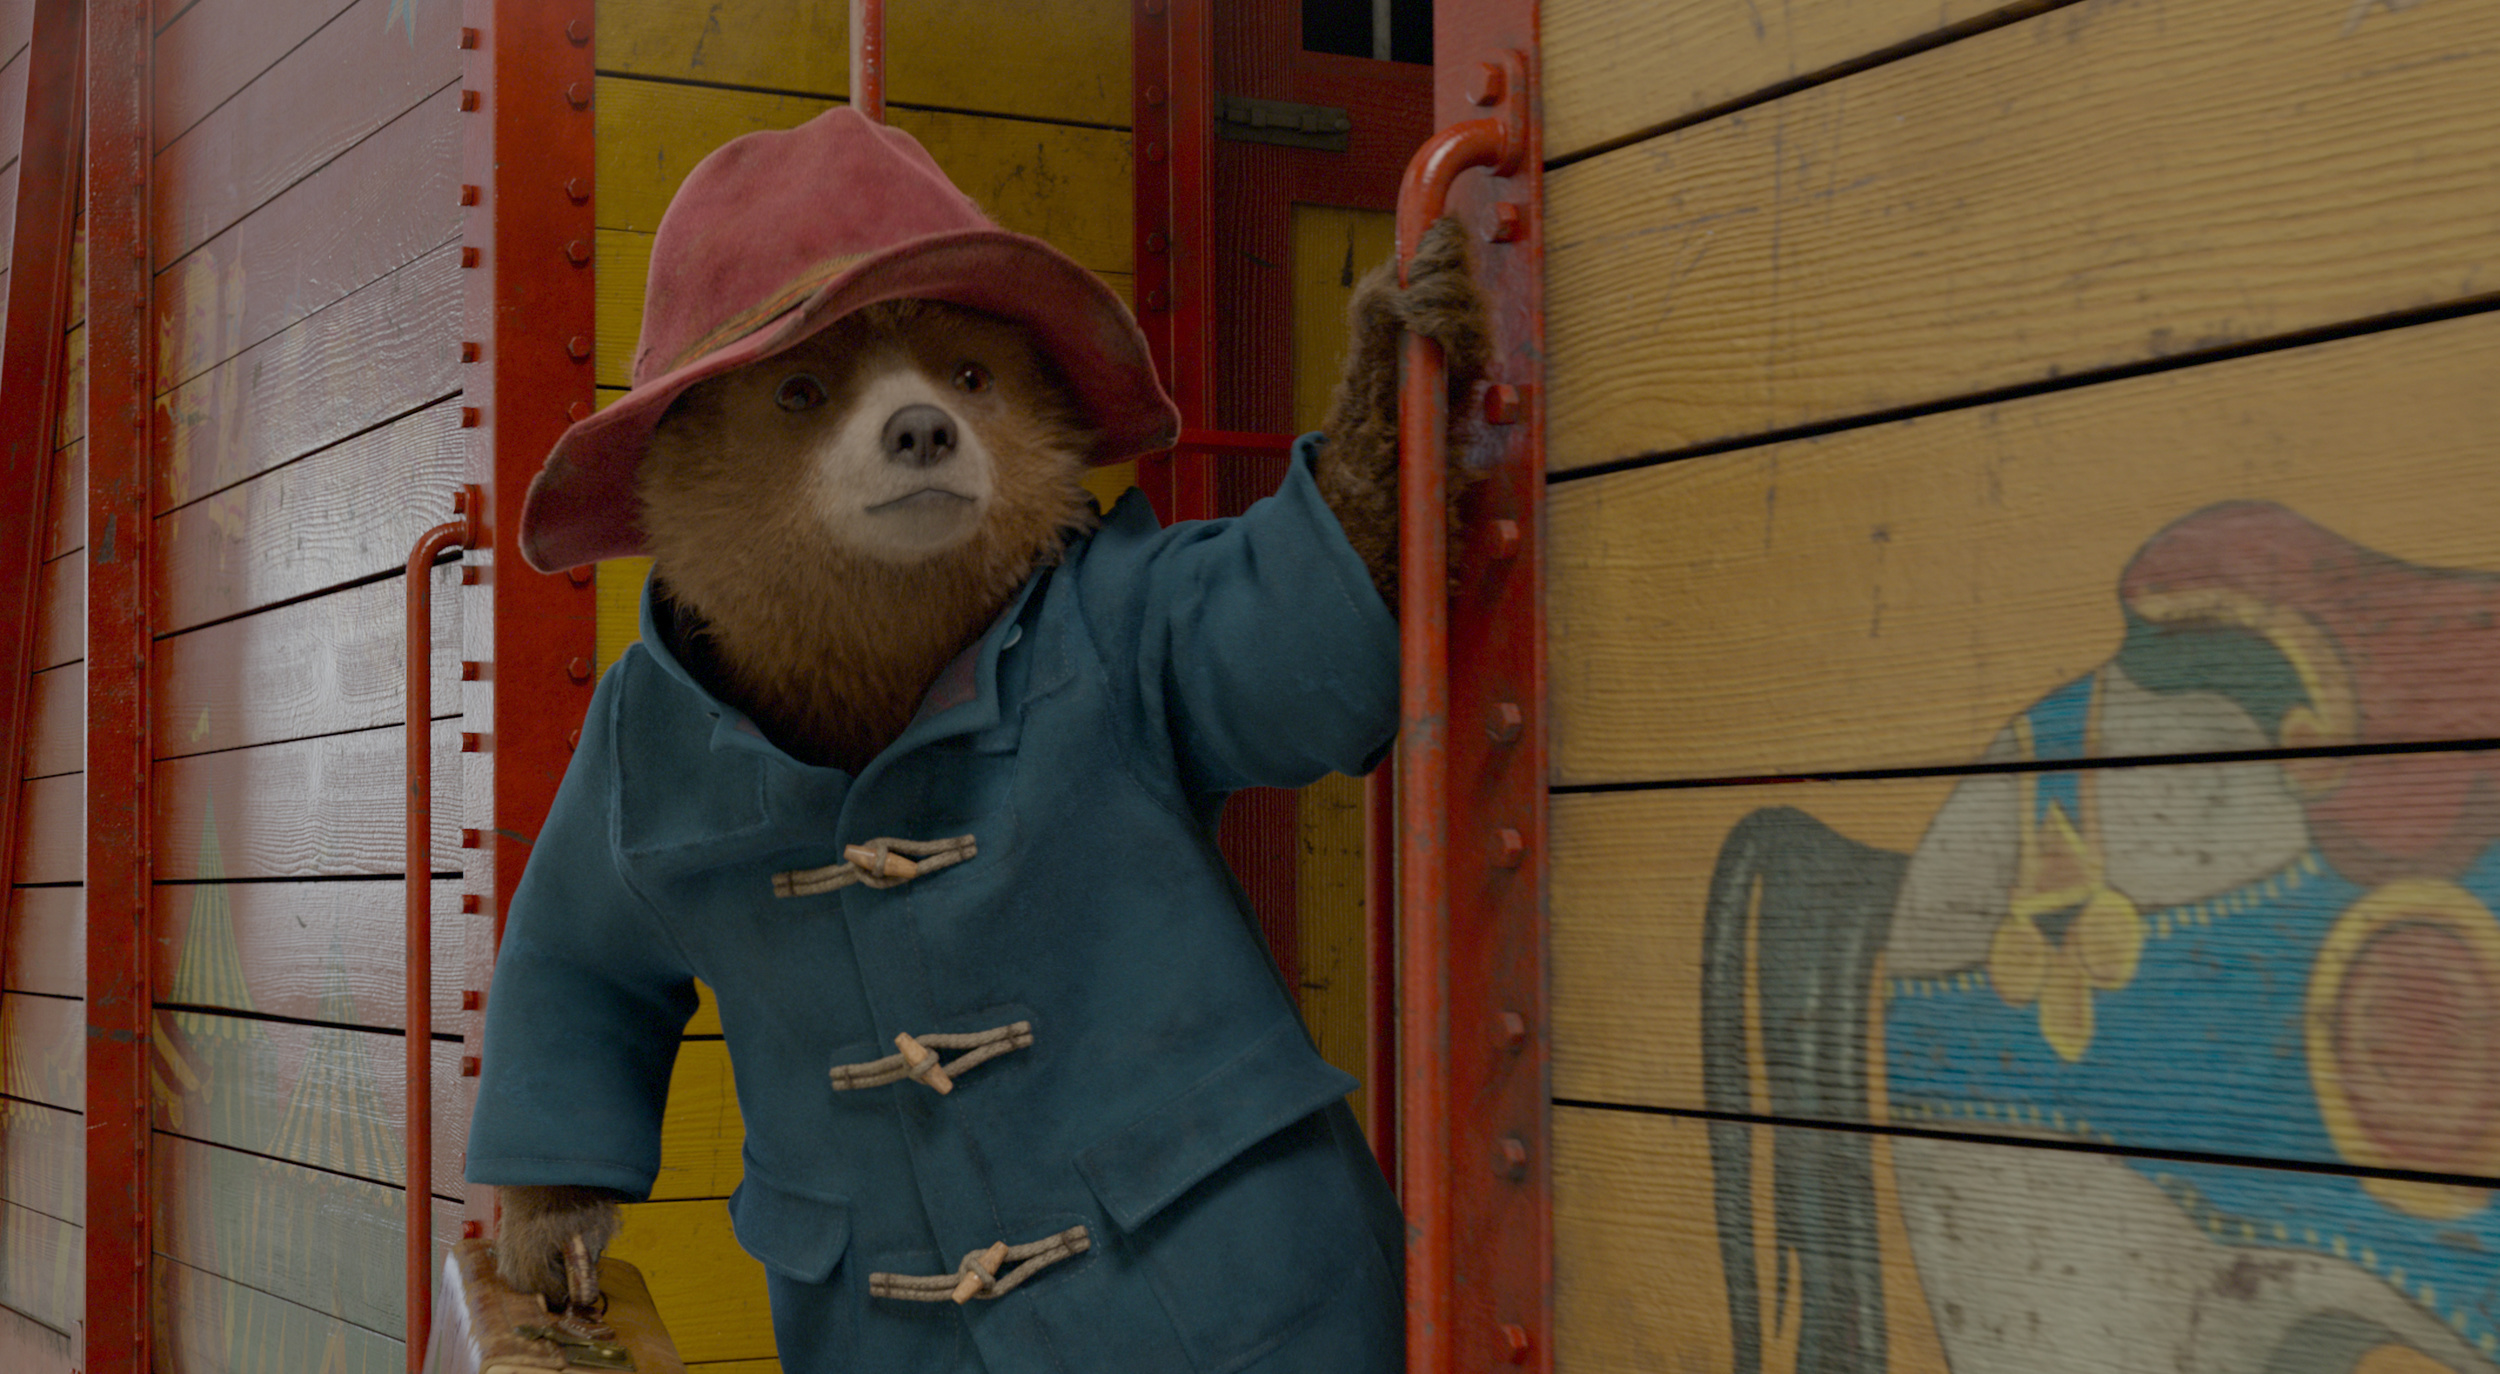 <p>Few films of recent memory have as fervent a following as <em>Paddington 2</em>. No, really. People <em>love</em> this movie. They like <em>Paddington</em>, but they love the sequel. We had to include this movie on our list of London films for all you marmalade heads out there.</p><p><a href='https://www.msn.com/en-us/community/channel/vid-cj9pqbr0vn9in2b6ddcd8sfgpfq6x6utp44fssrv6mc2gtybw0us'>Follow us on MSN to see more of our exclusive entertainment content.</a></p>